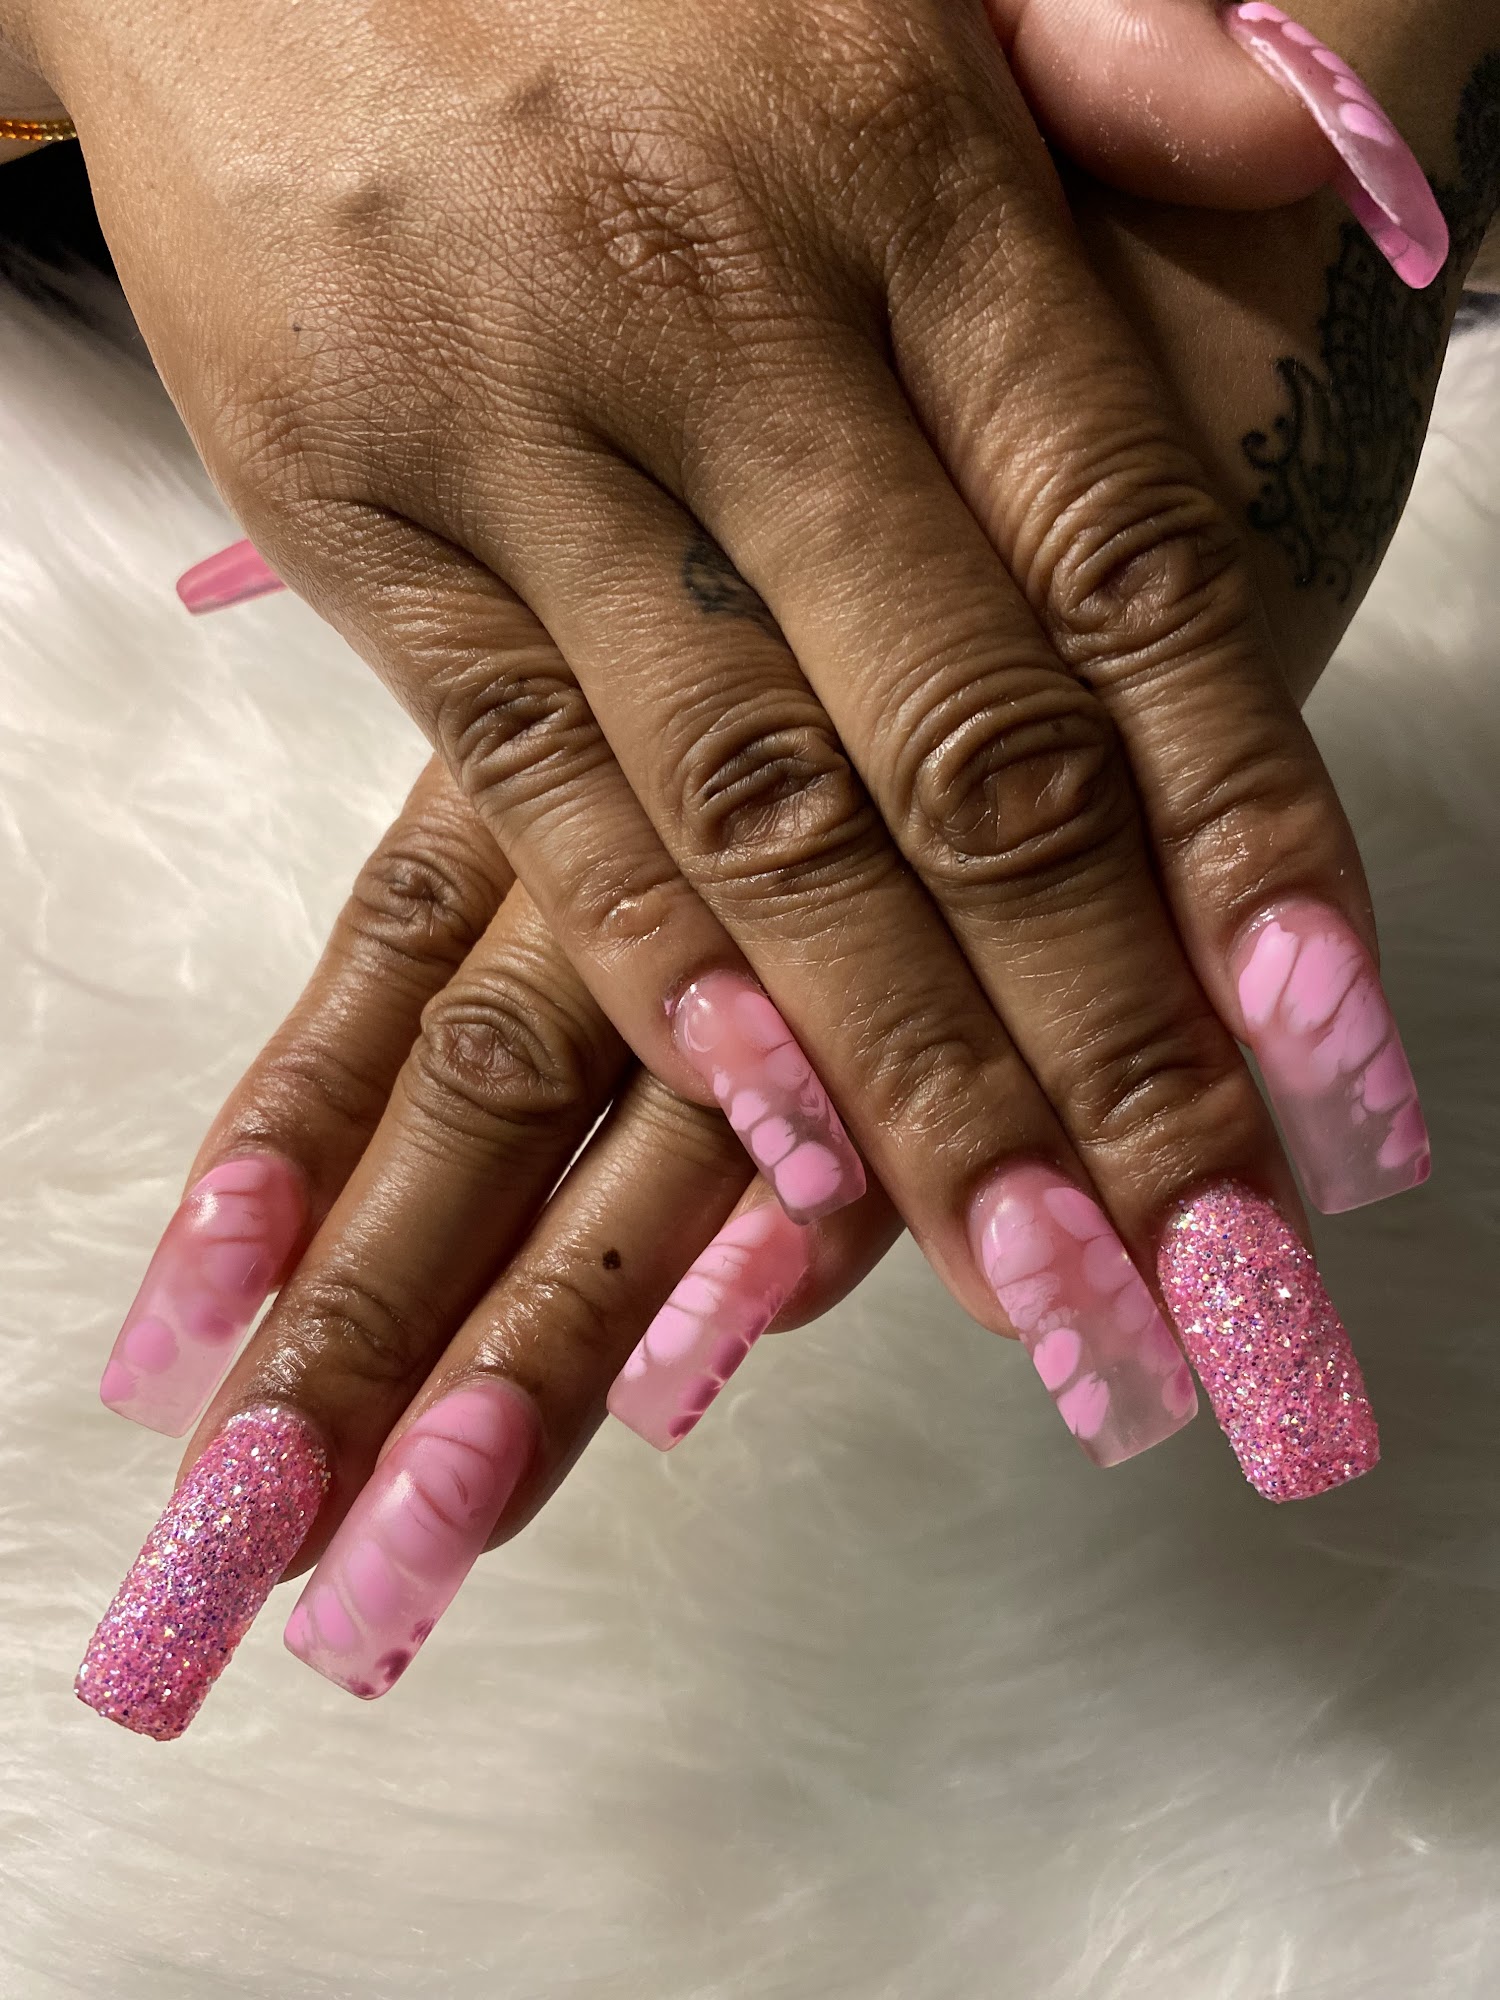 Anointed Hands Grooming Spa & Salon 10 E Main St Suite I, Millville New Jersey 08332